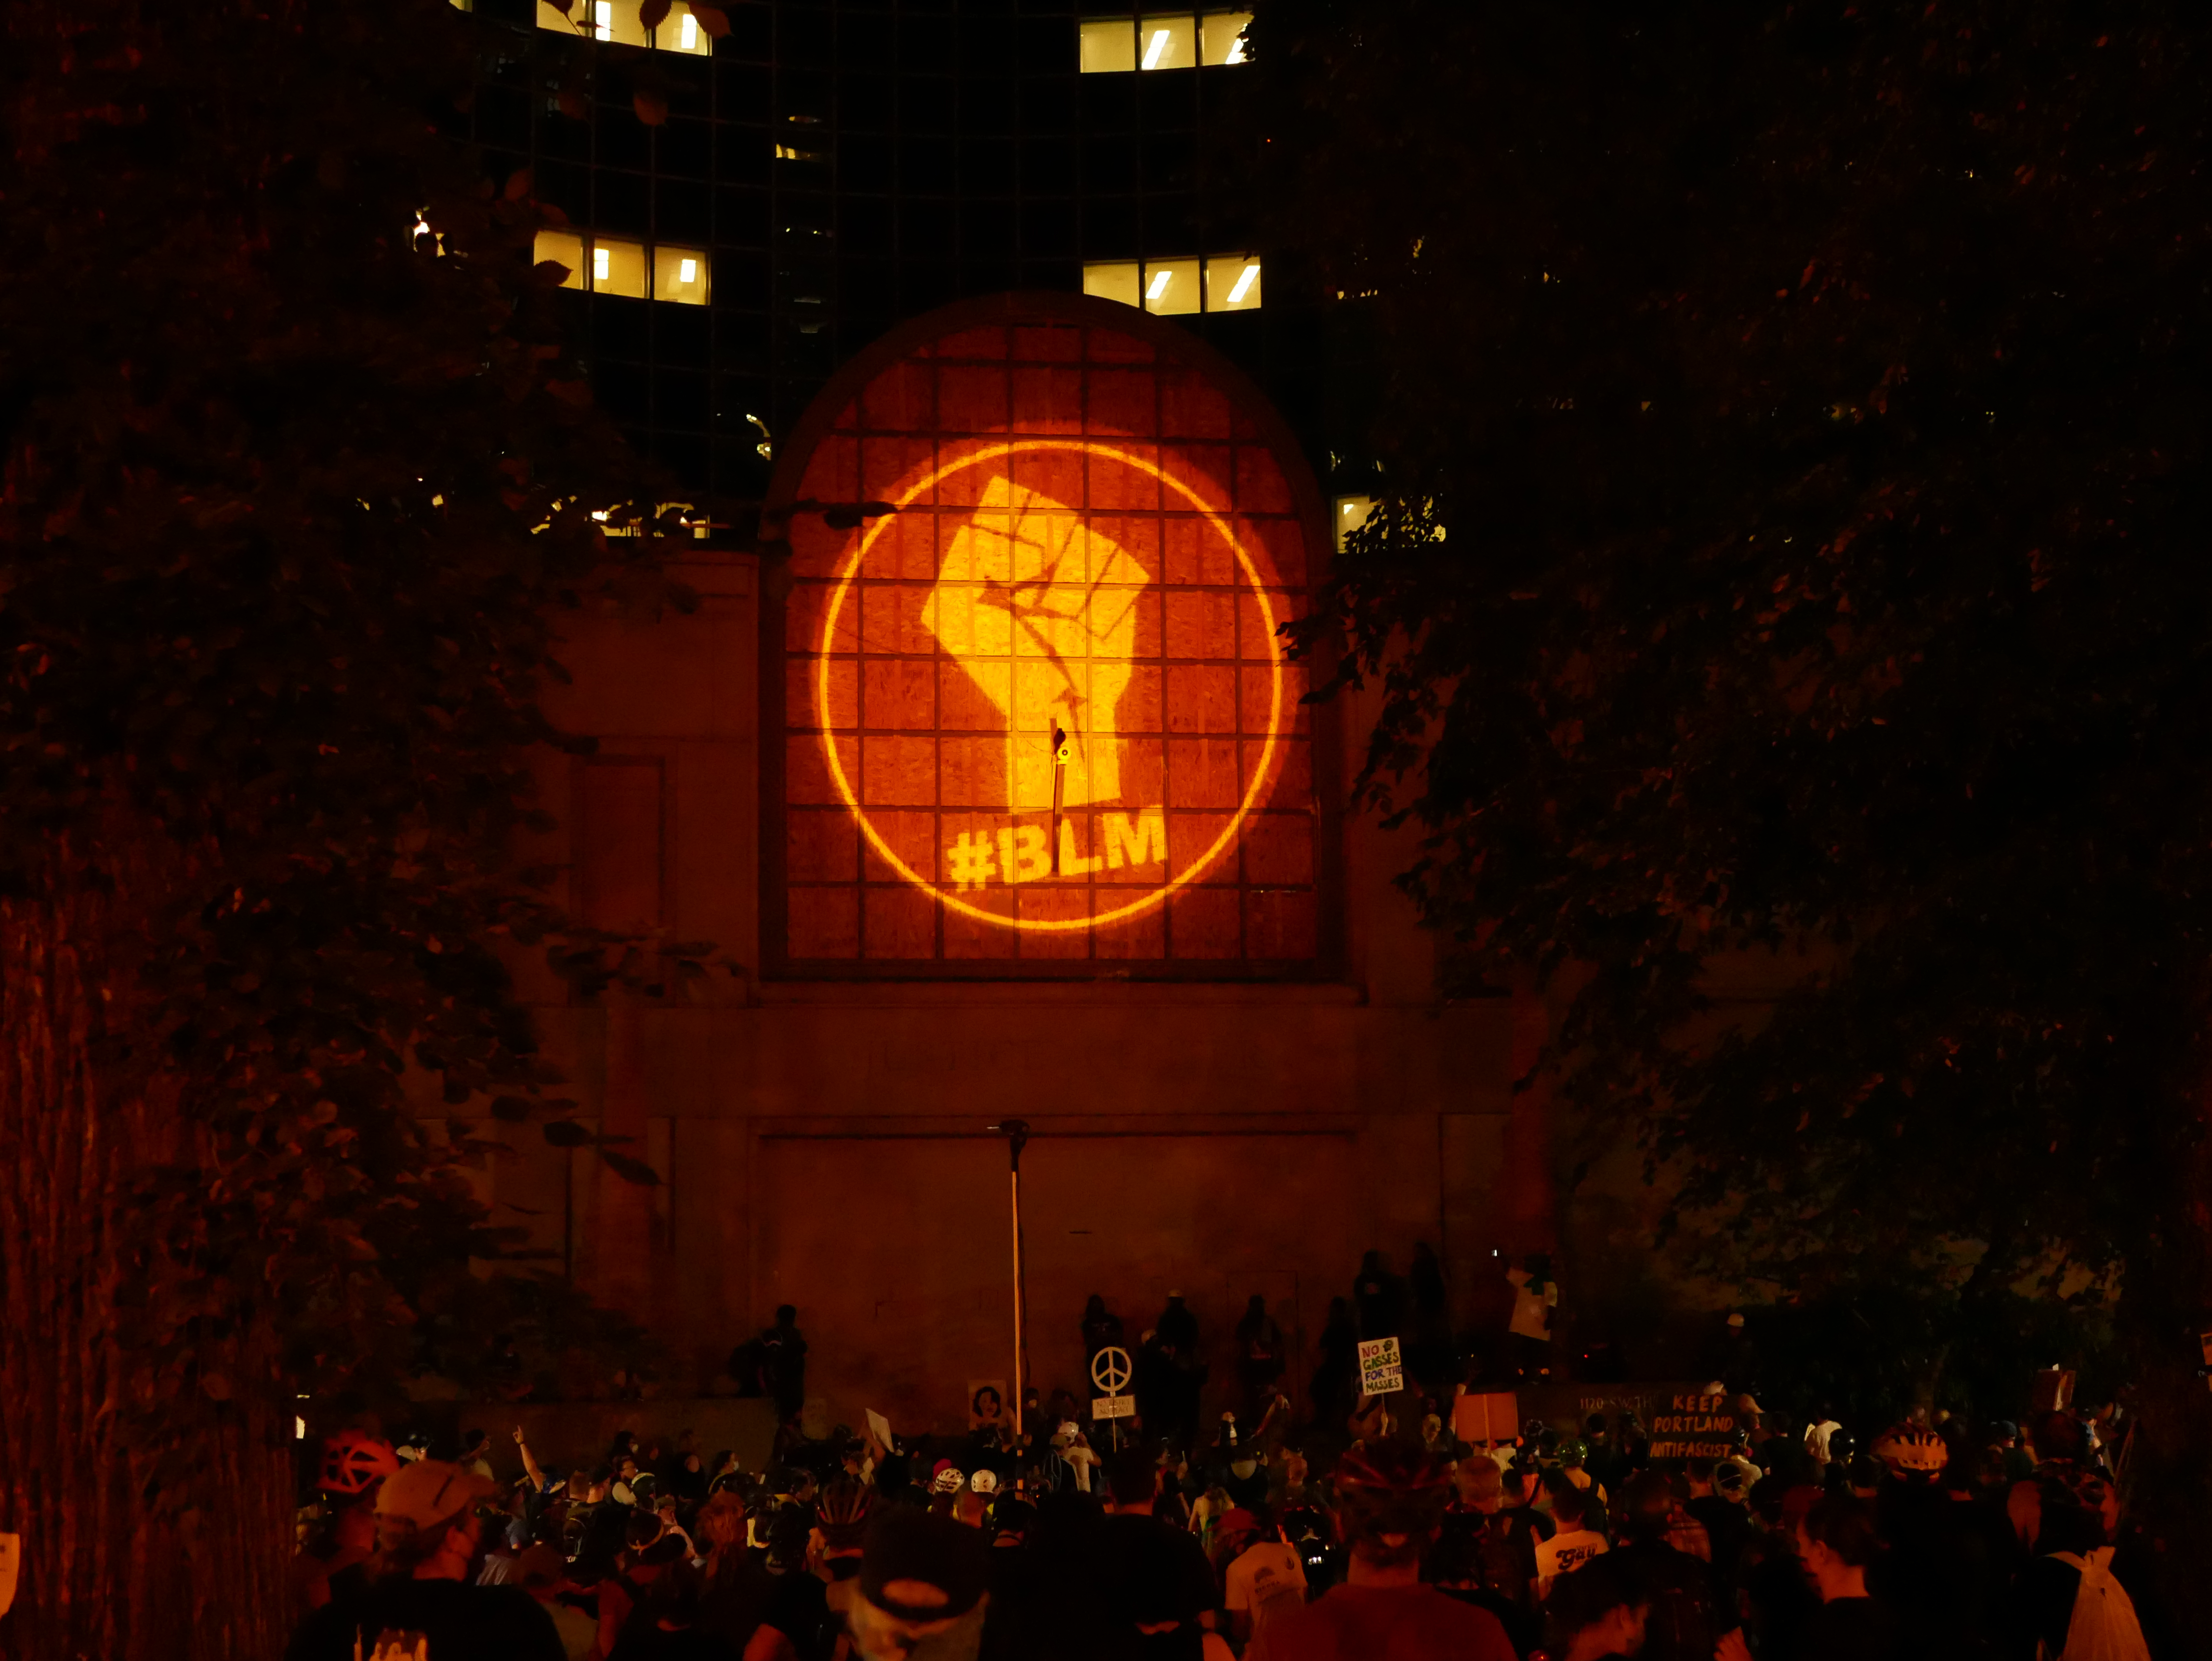 Photograph of a BLM fist projected onto the side of a building.